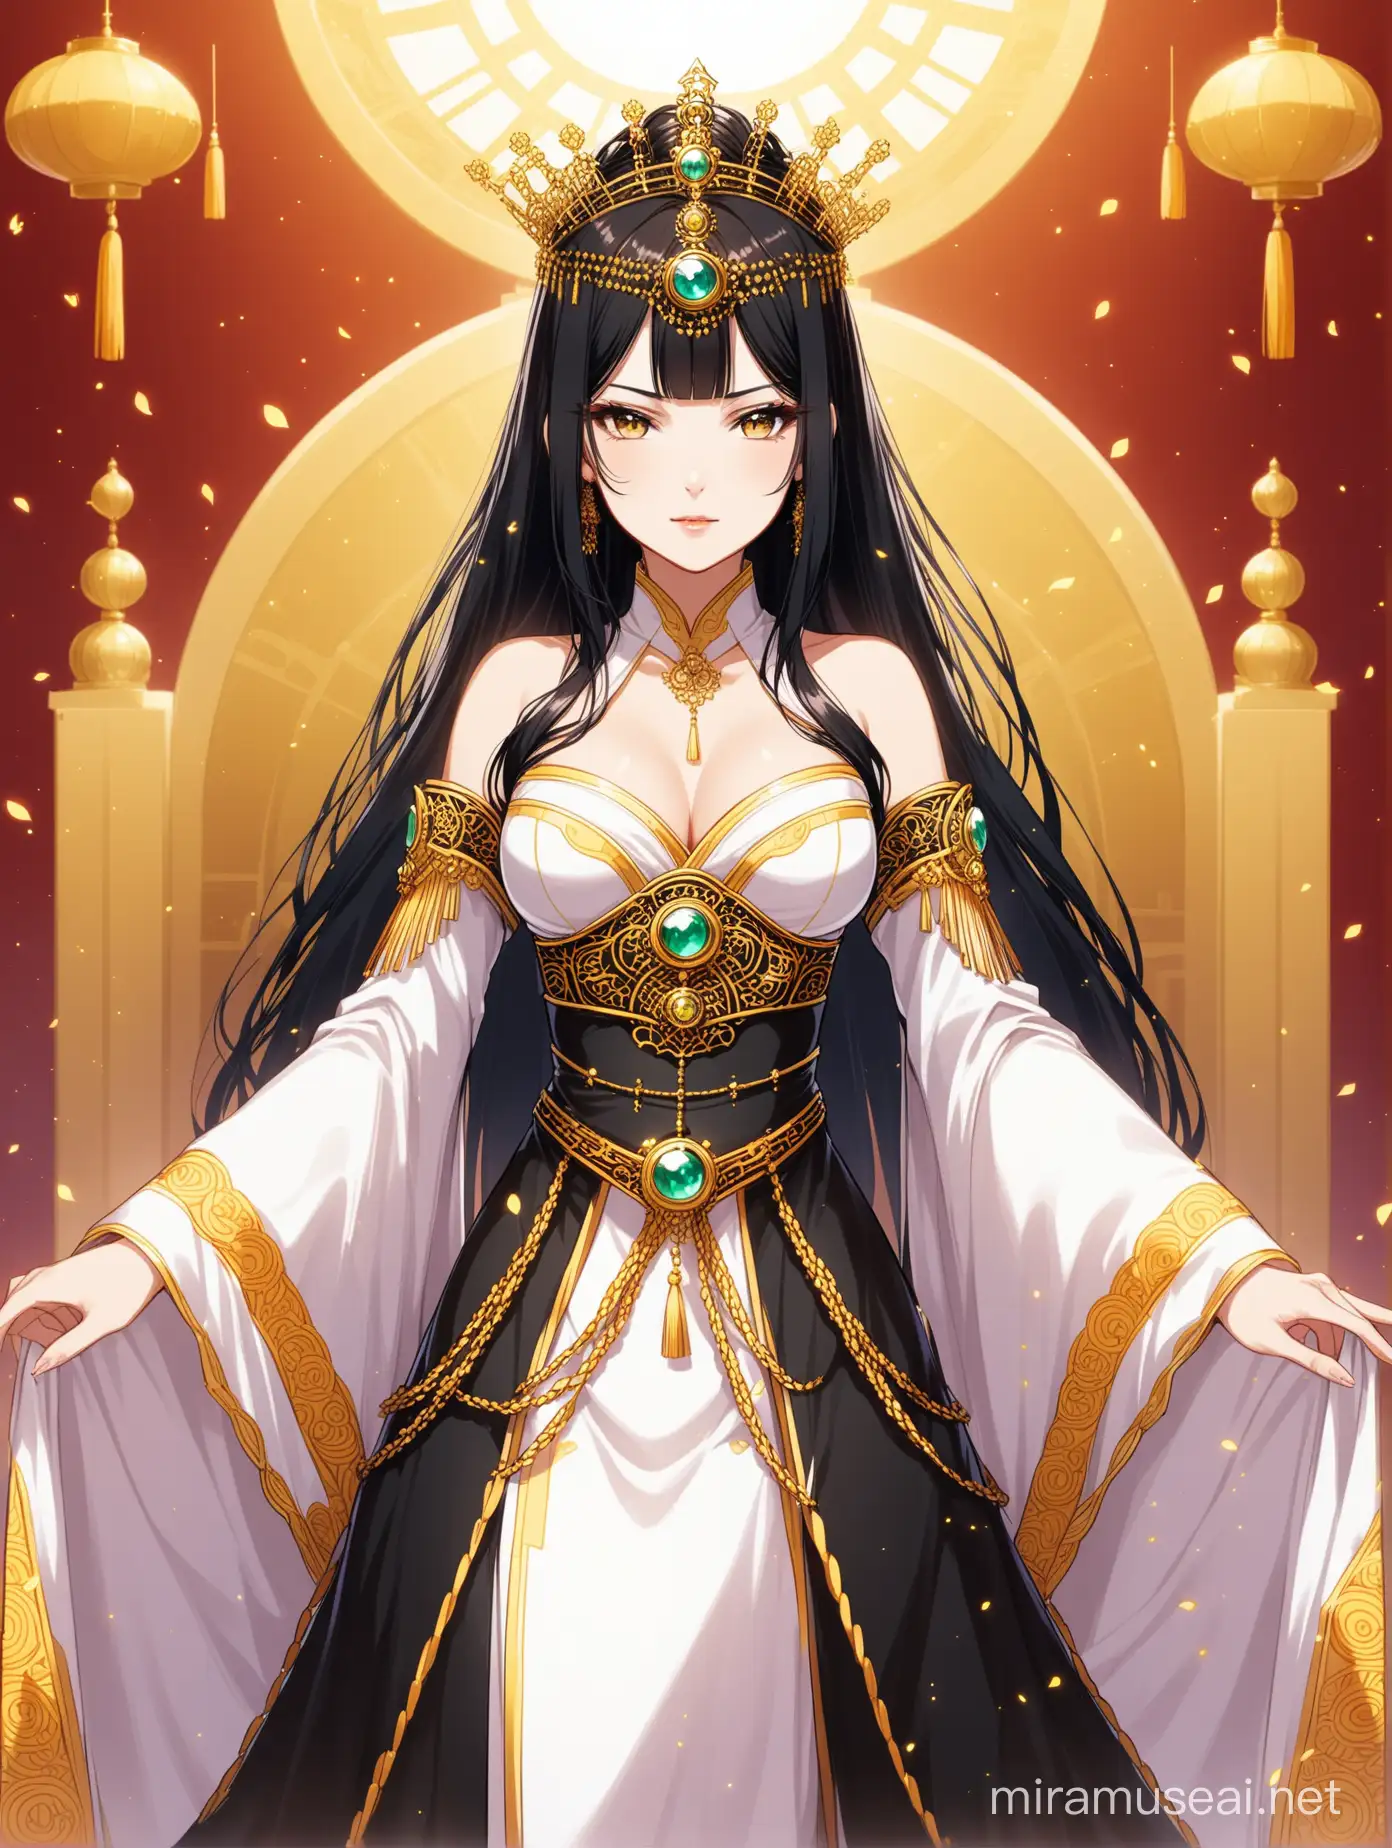 A woman with anime-style black hair, cosplaying an empress.